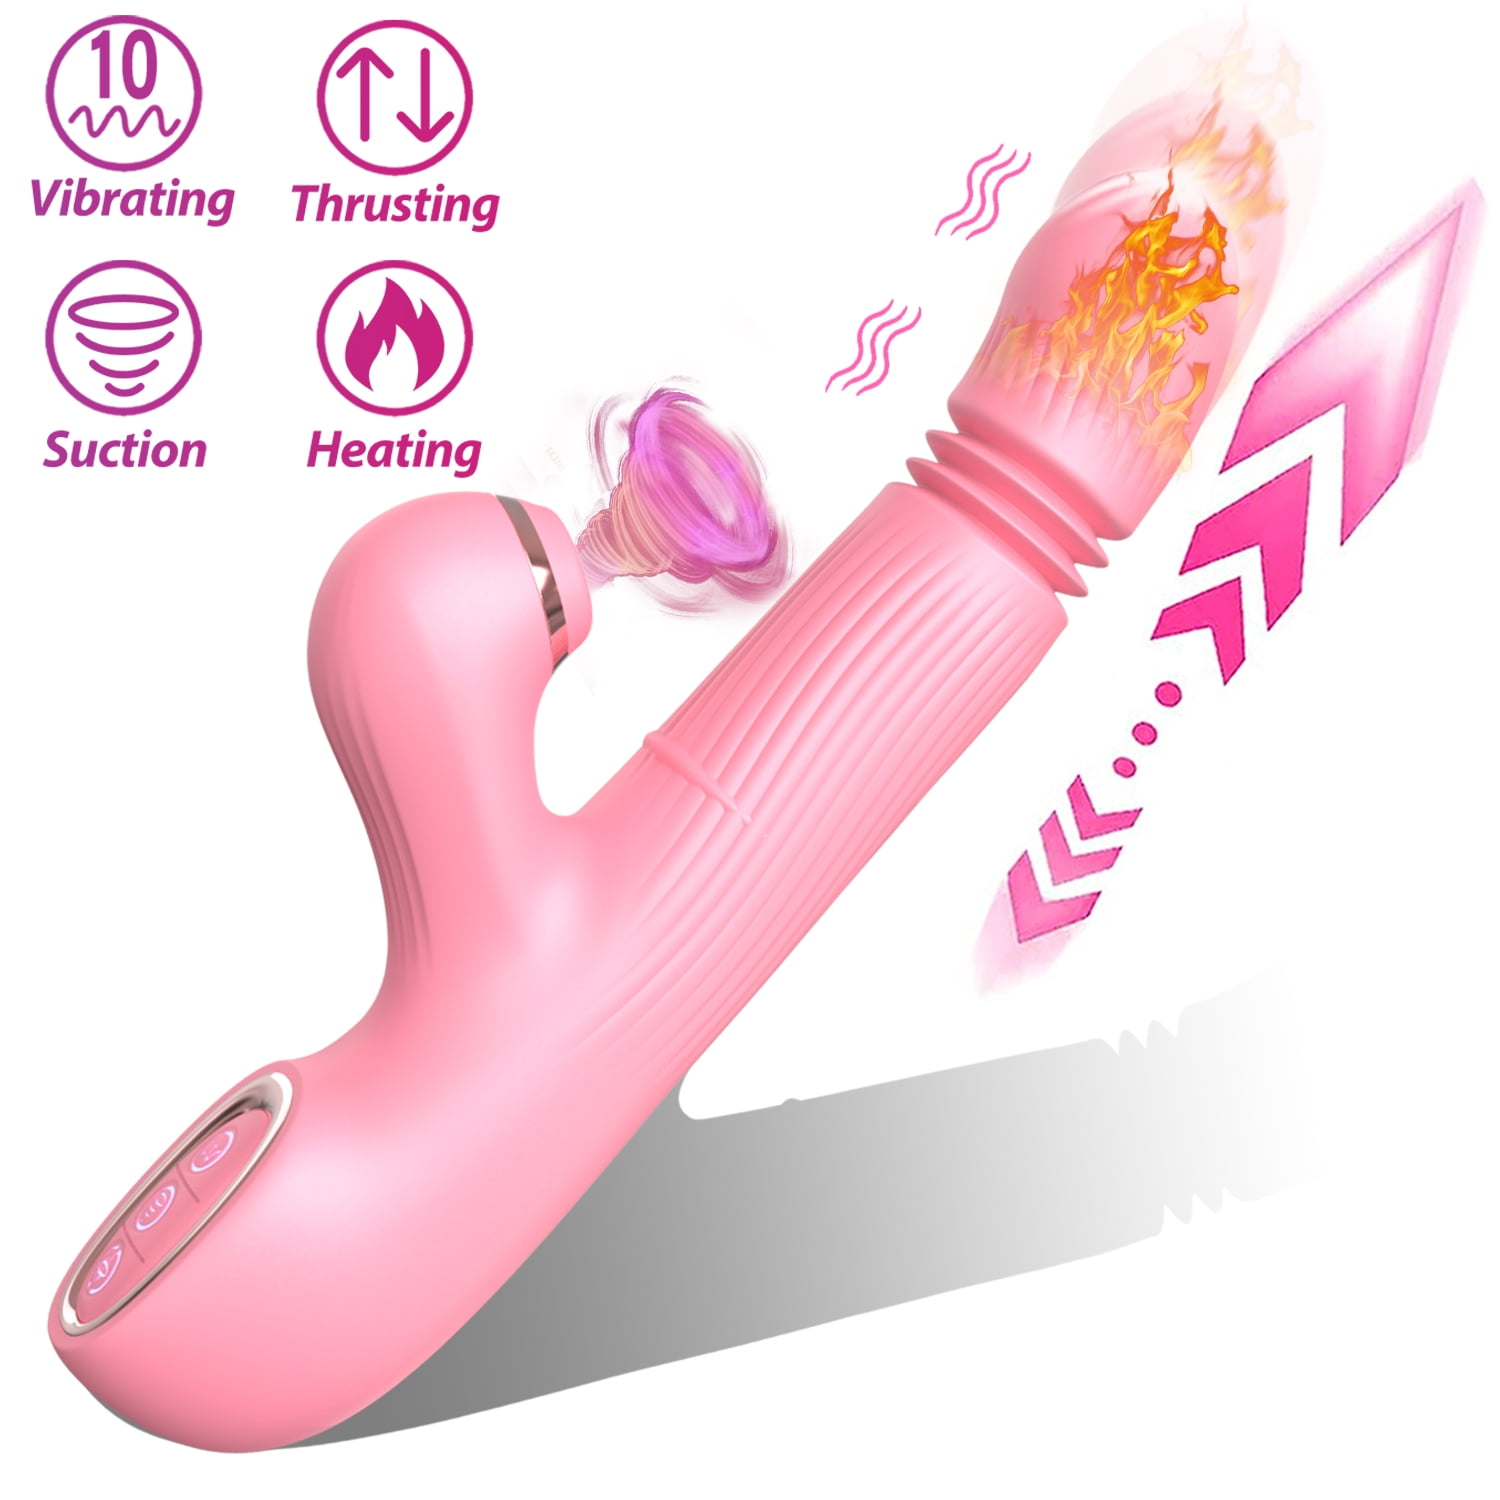 EXDOLL Thrusting Dildo Vibrator Adult Sensory Toys for Women, G Spot Clitoral Pulsating Tap Vibrator with Vibration and Pulsating Tap and Heating Function, Waterproof Sex Toy for Women or Couples photo photo